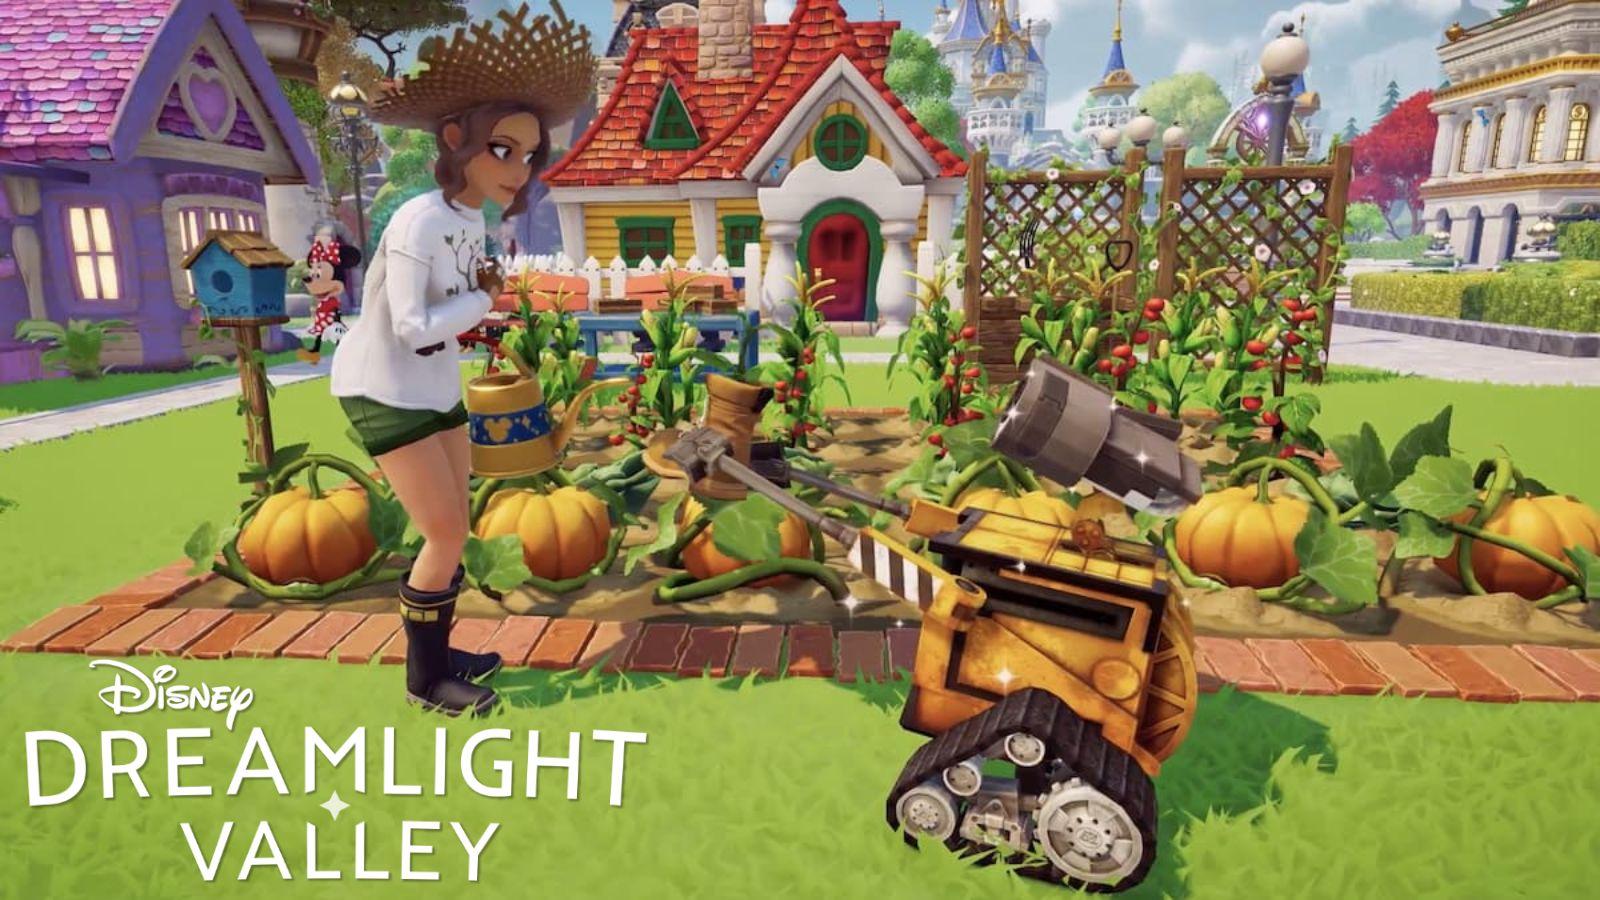 Disney Dreamlight Valley crop growth times, locations & sell price - Dexerto